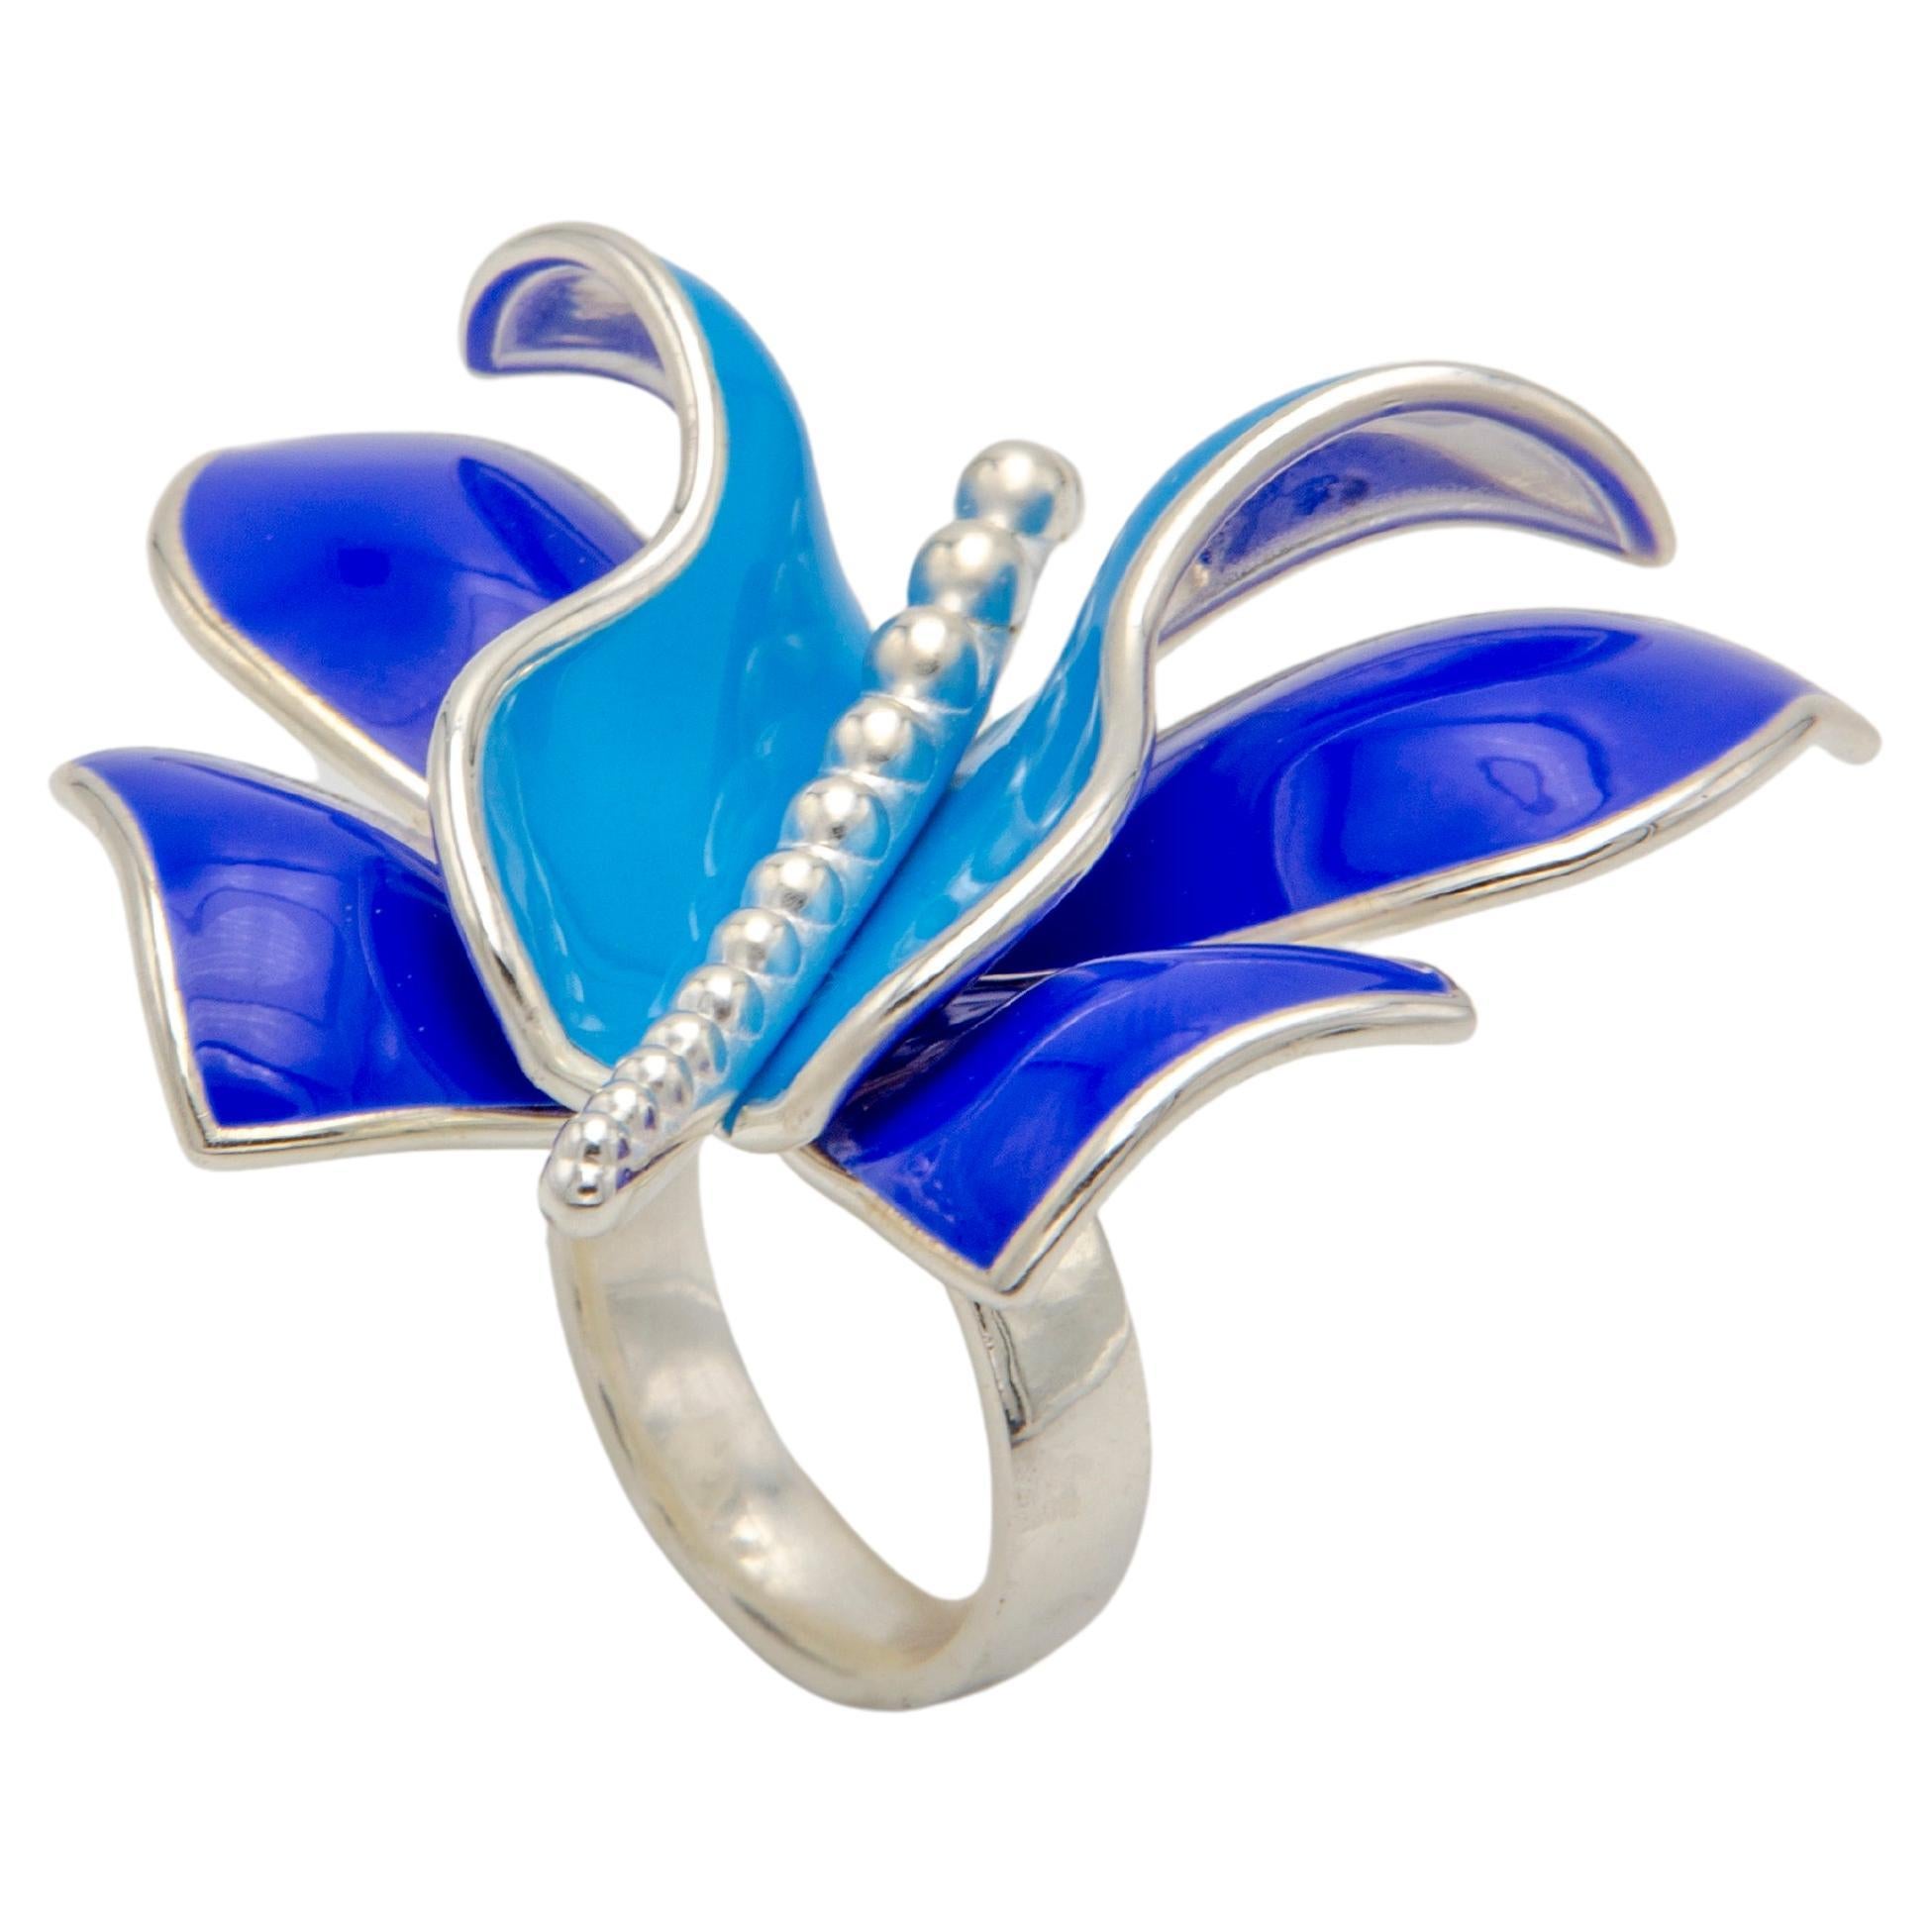 For Sale:  Six Wings 925 Silver Ring Big Butterfly Aurora with Blue and Light Blue Enamel